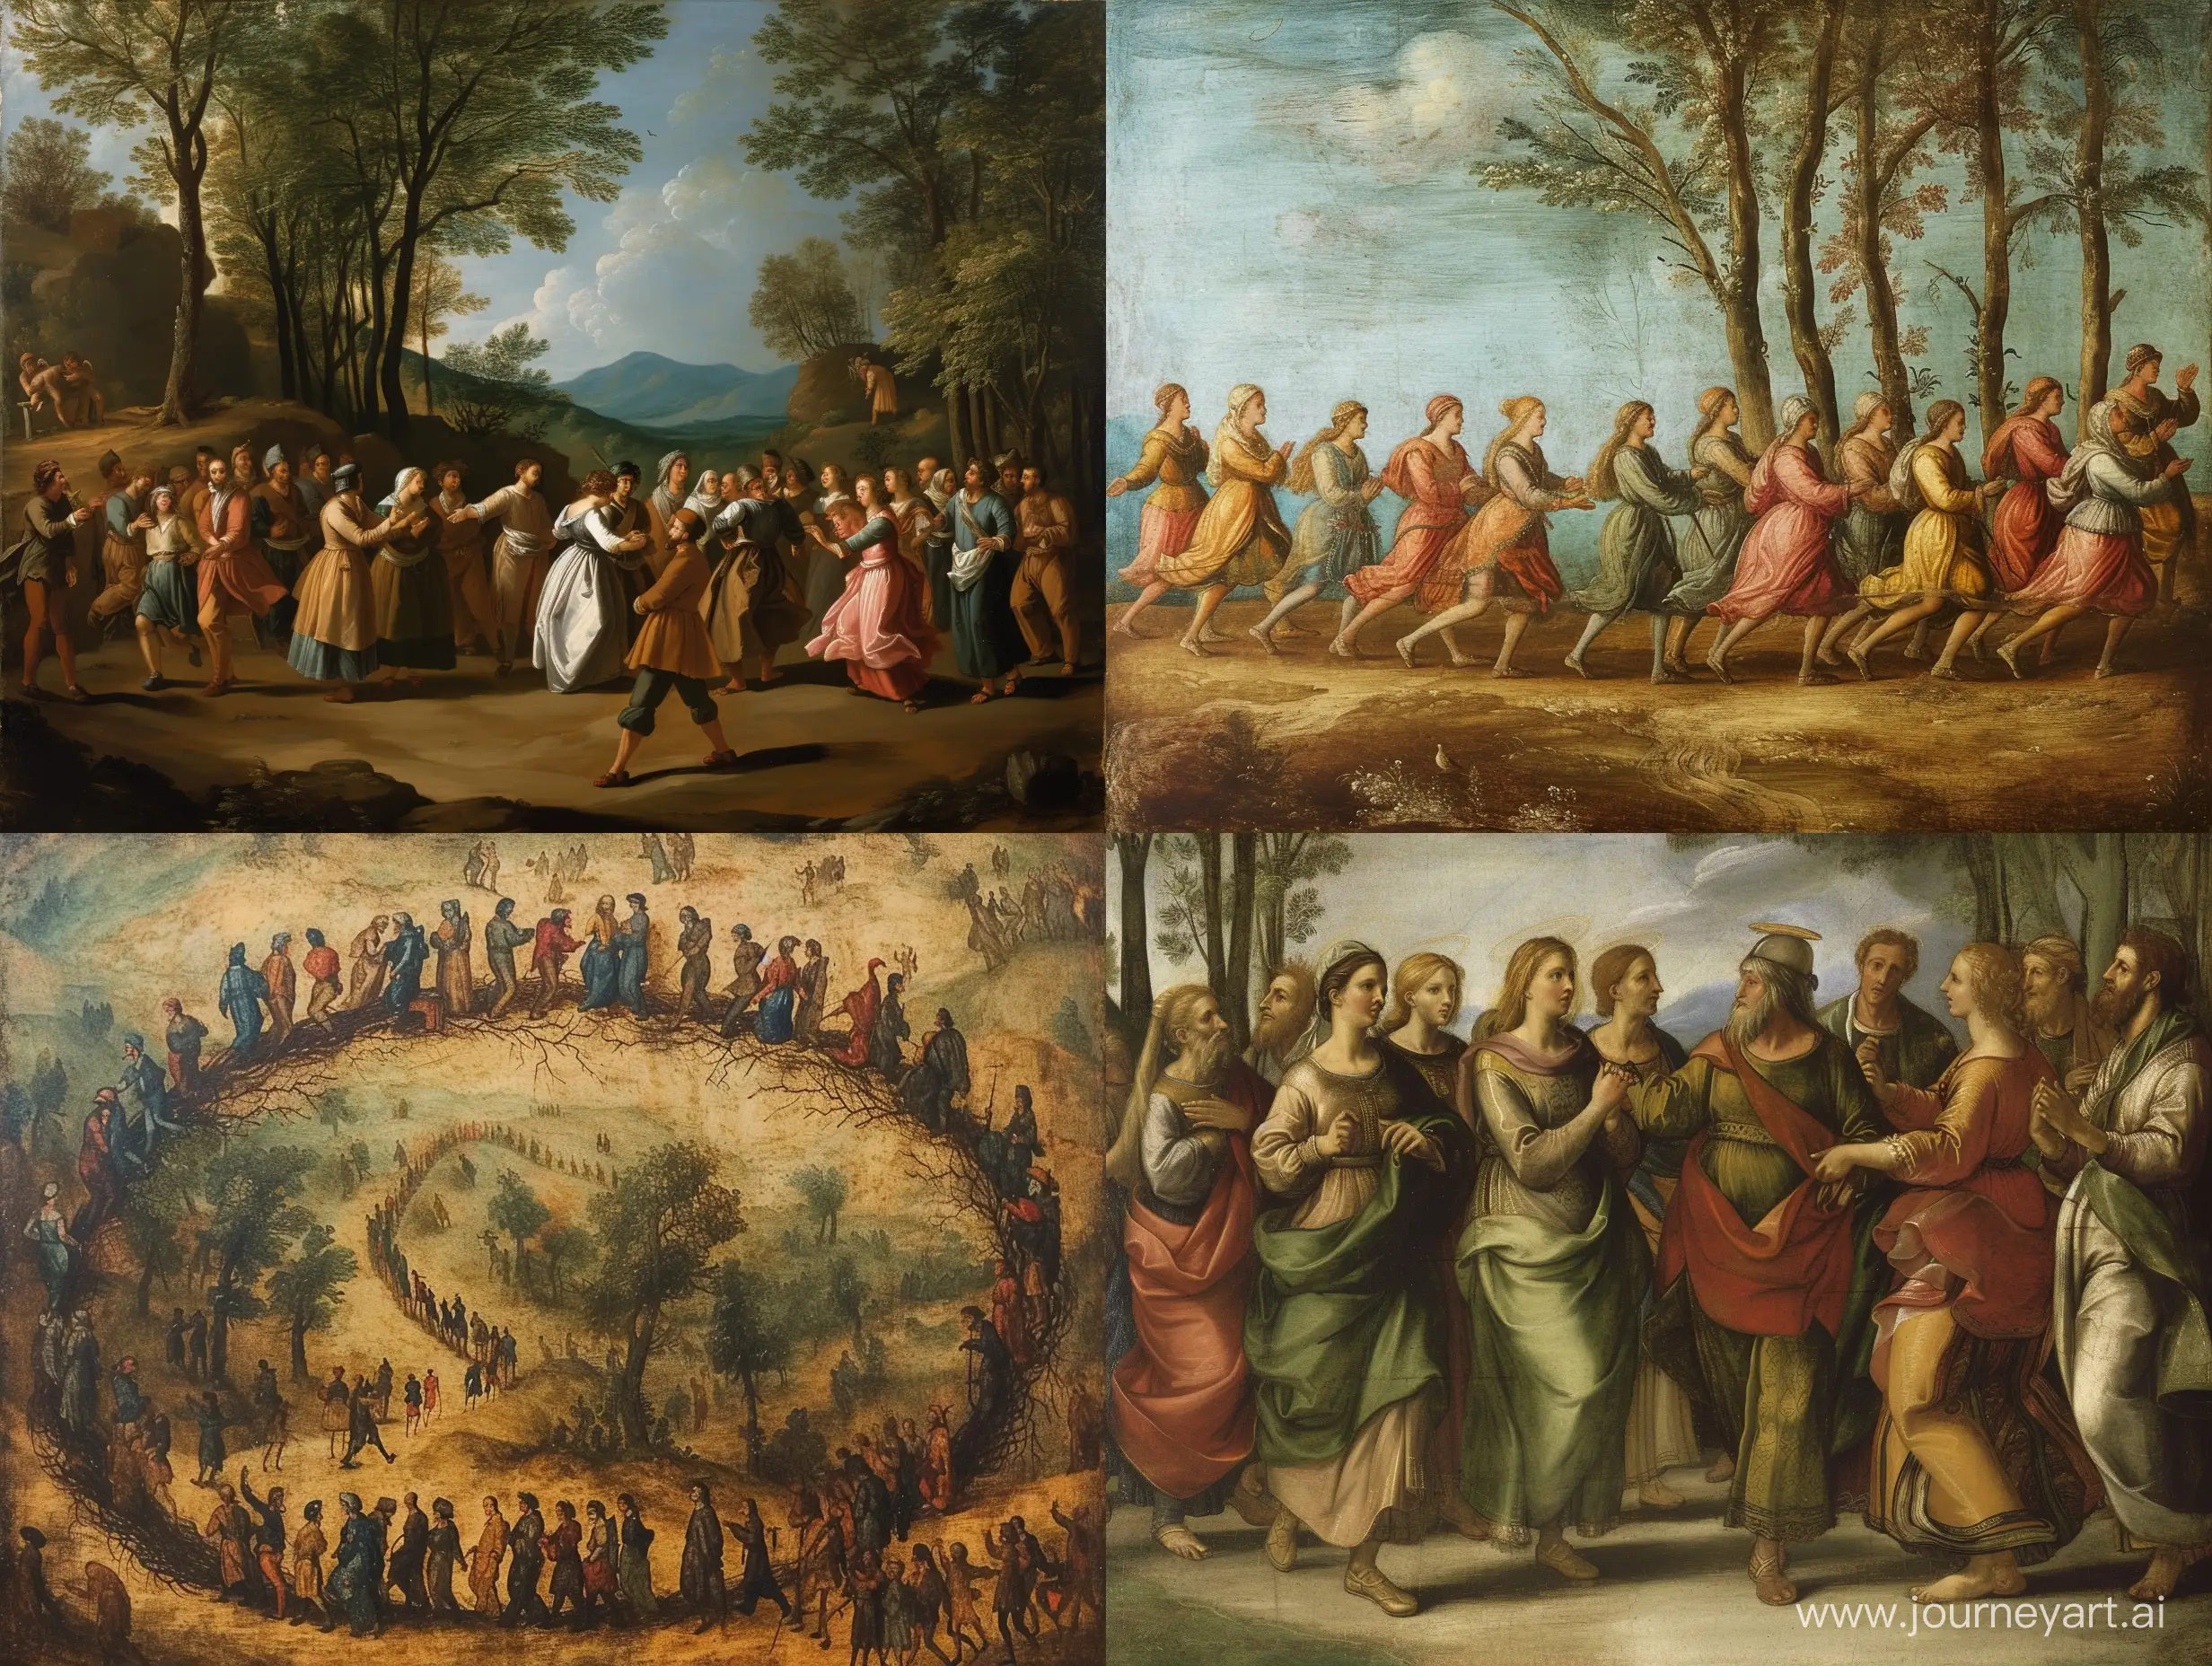 people following each other and forming communities, baroque artstyle, painting